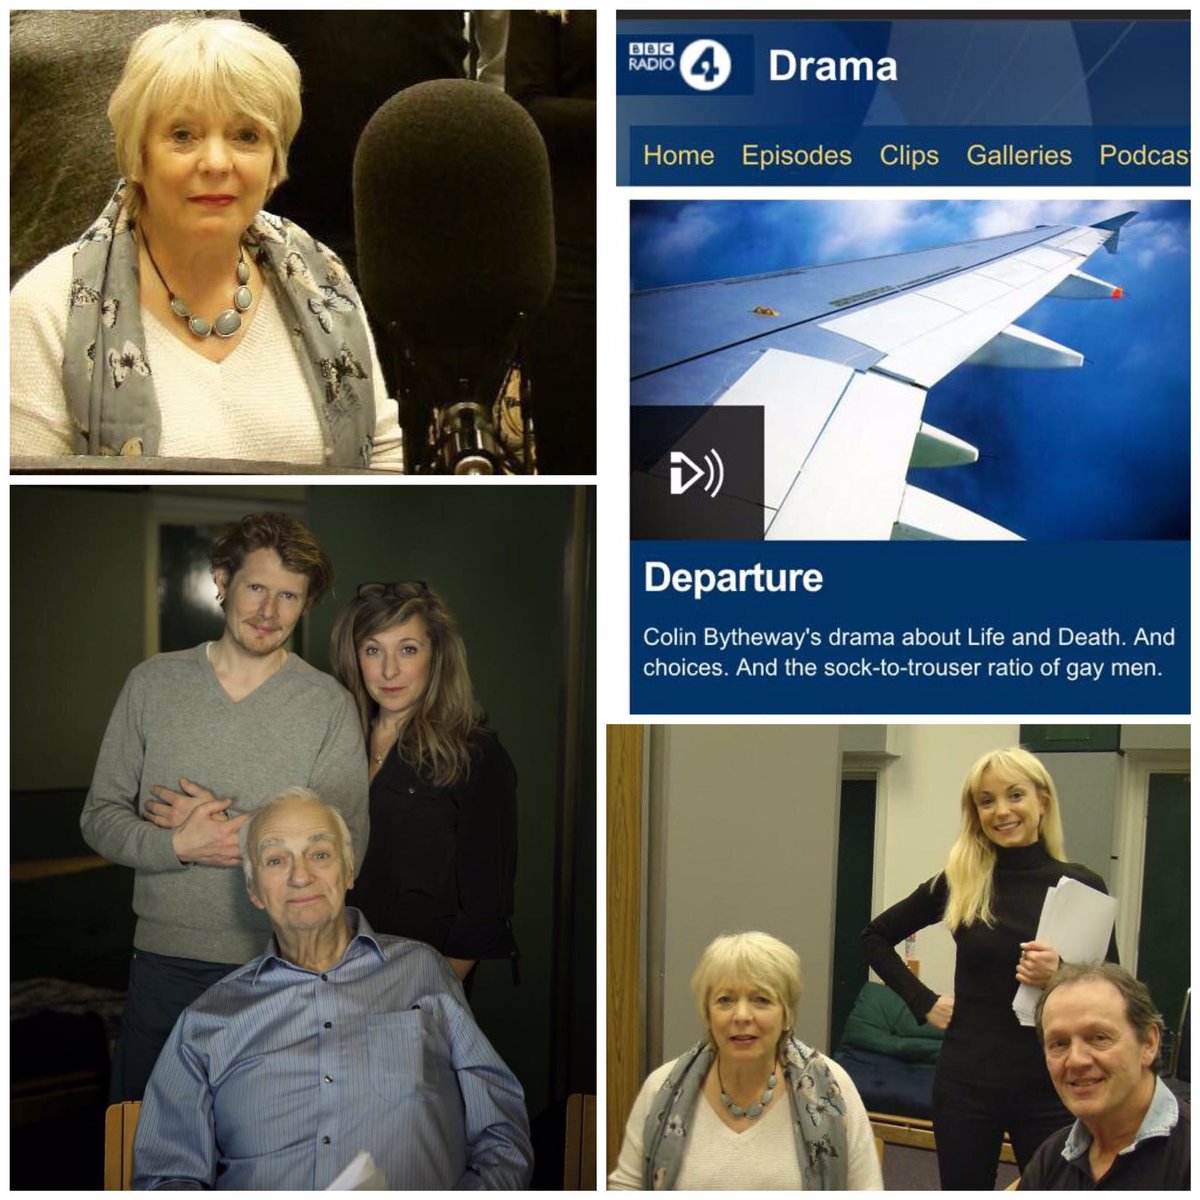 So proud to have this play I wrote repeated tomorrow afternoon on @BBCRadio4 The most amazing cast @helen_george @TracyAnnO #alisonsteadman #kevinwhatley #julianrhindtutt #royhudd @BBCRadioDrama @BBCiPlayerRadio